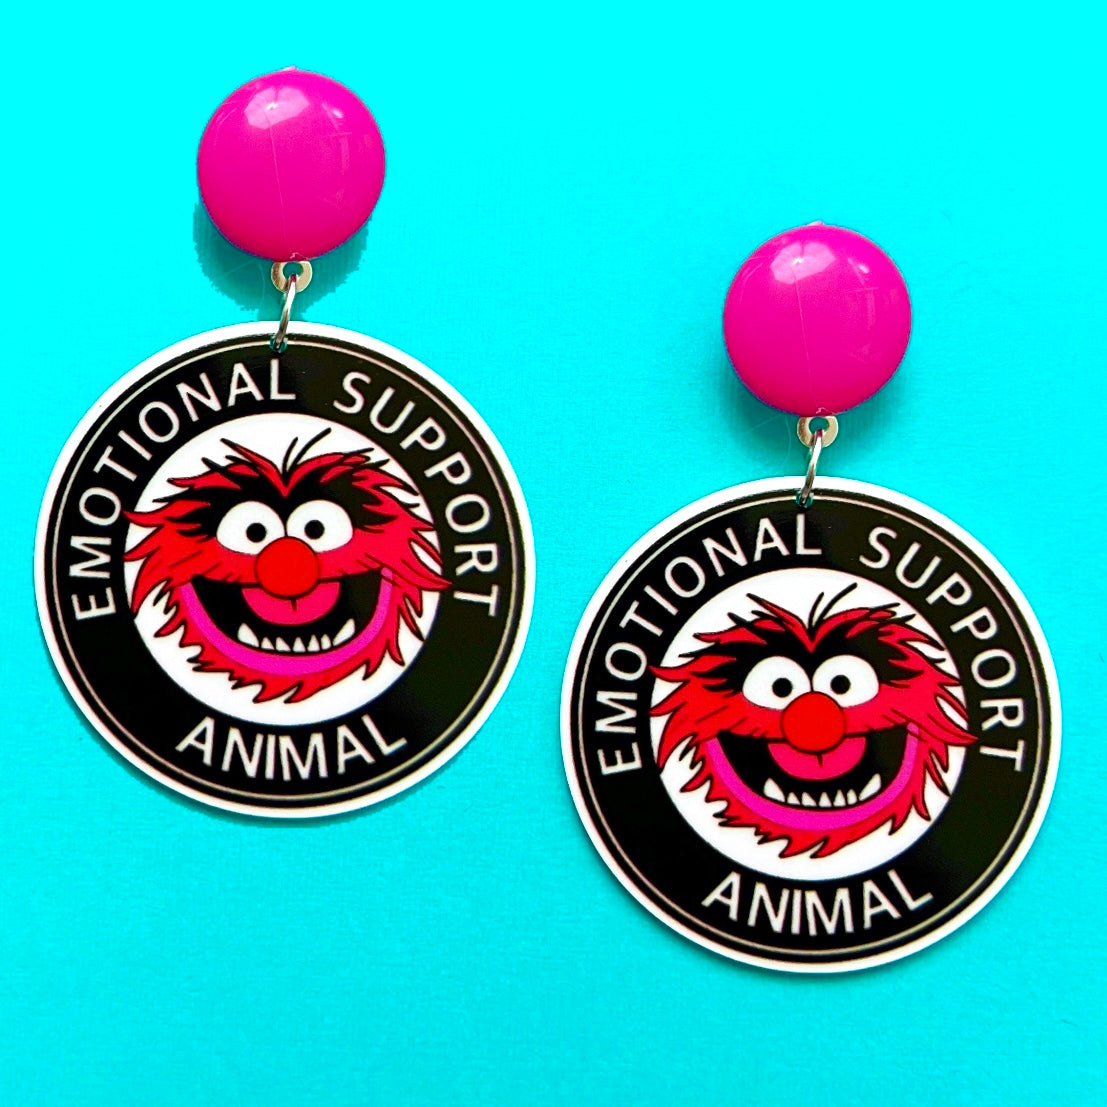 Emotional Support Animal Inspired Drop Earrings